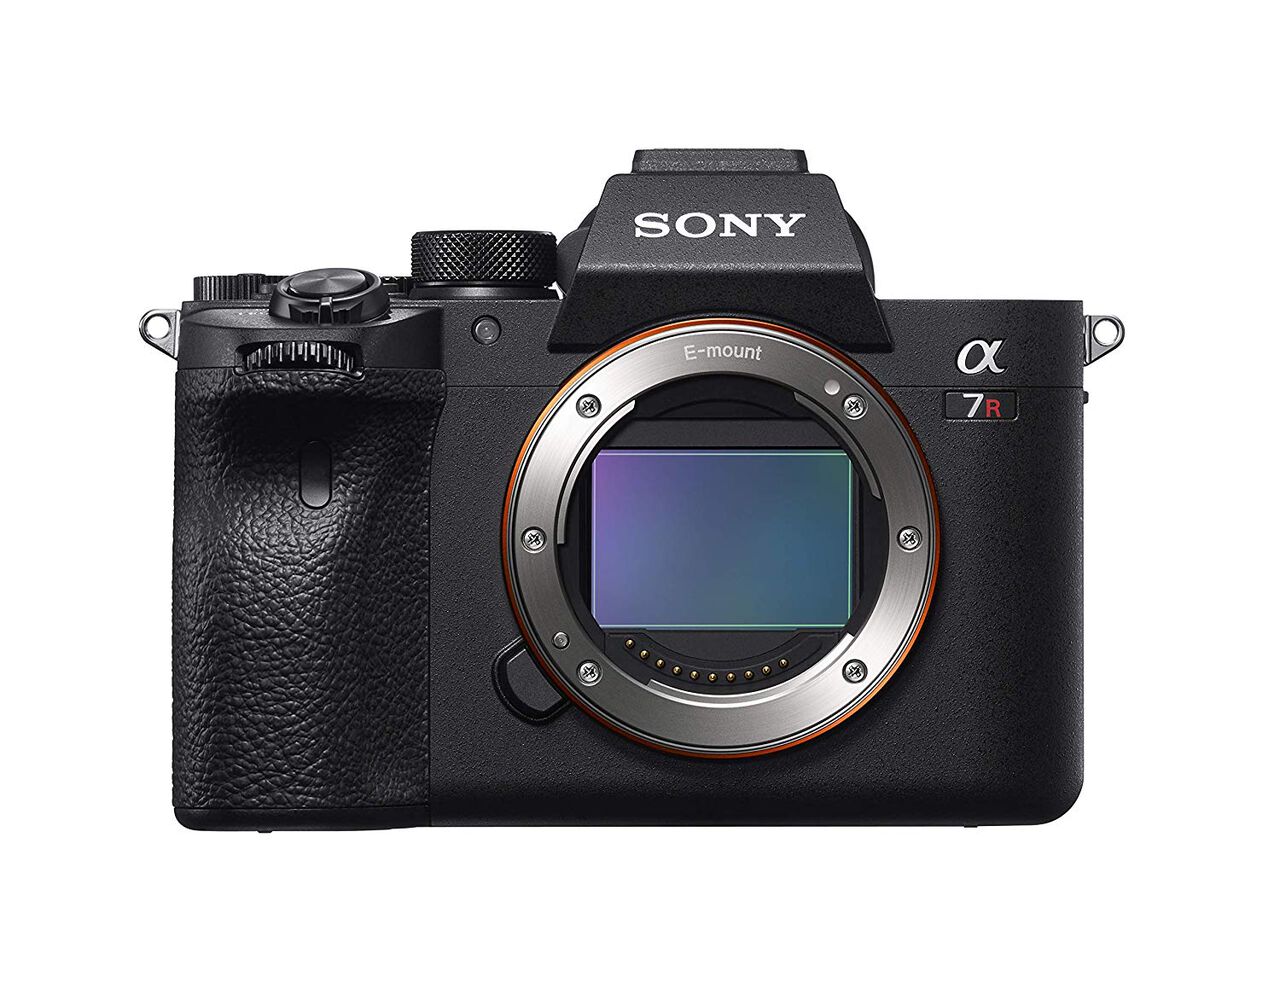 The Best Sony Travel Cameras to Buy in 2021 - A Complete Buying Guide to Sony  Mirrorless Cameras